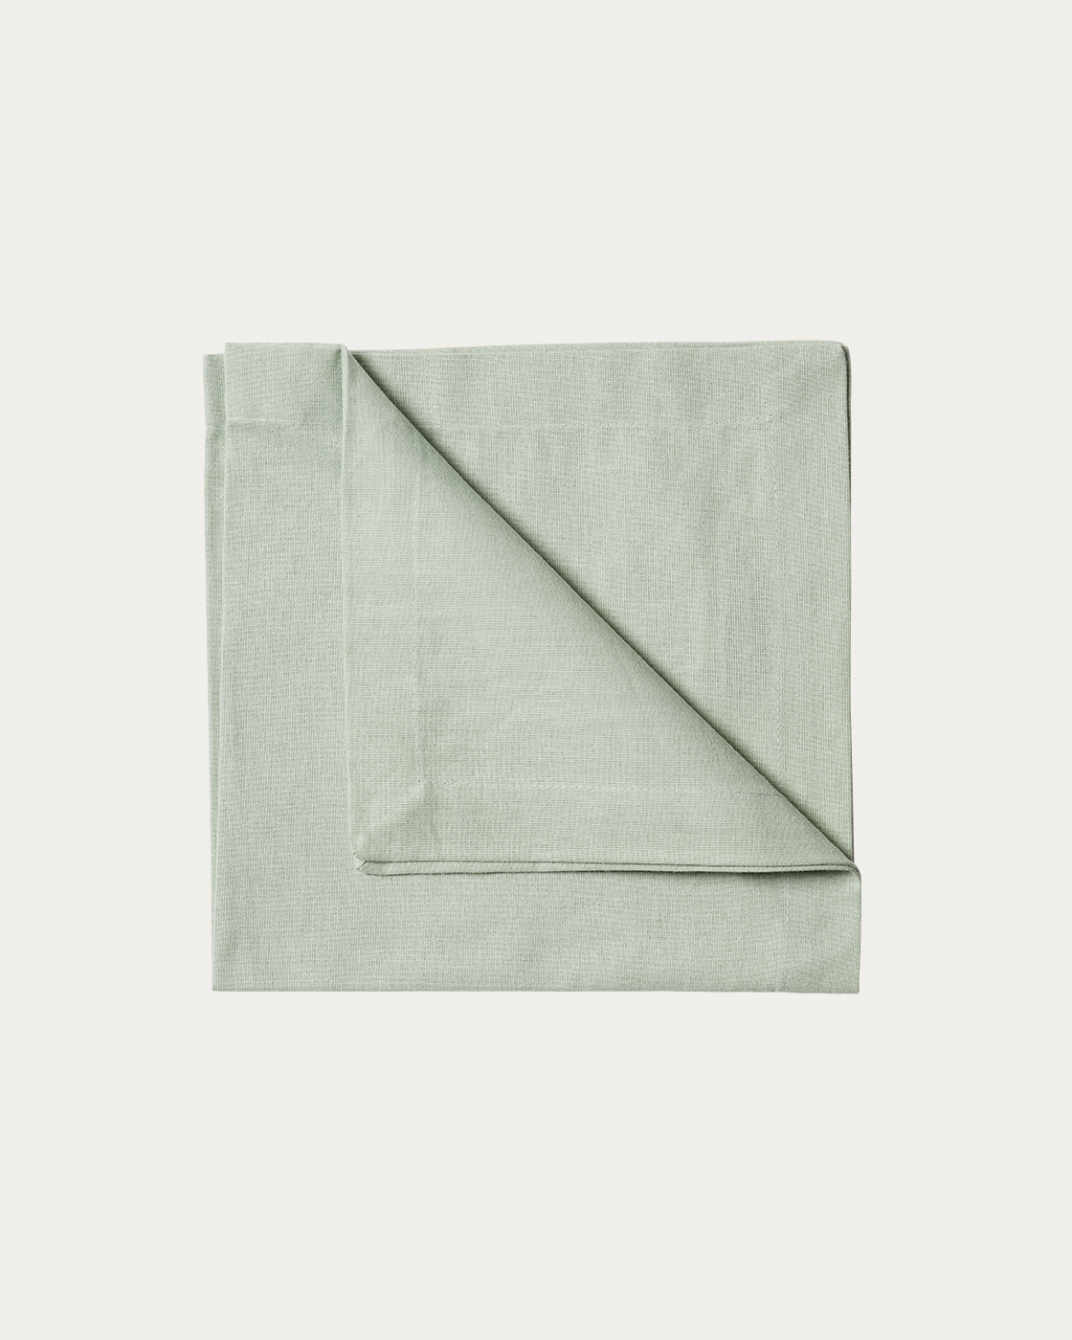 Product image light ice green ROBERT napkin made of soft cotton from LINUM DESIGN. Size 45x45 cm and sold in 4-pack.